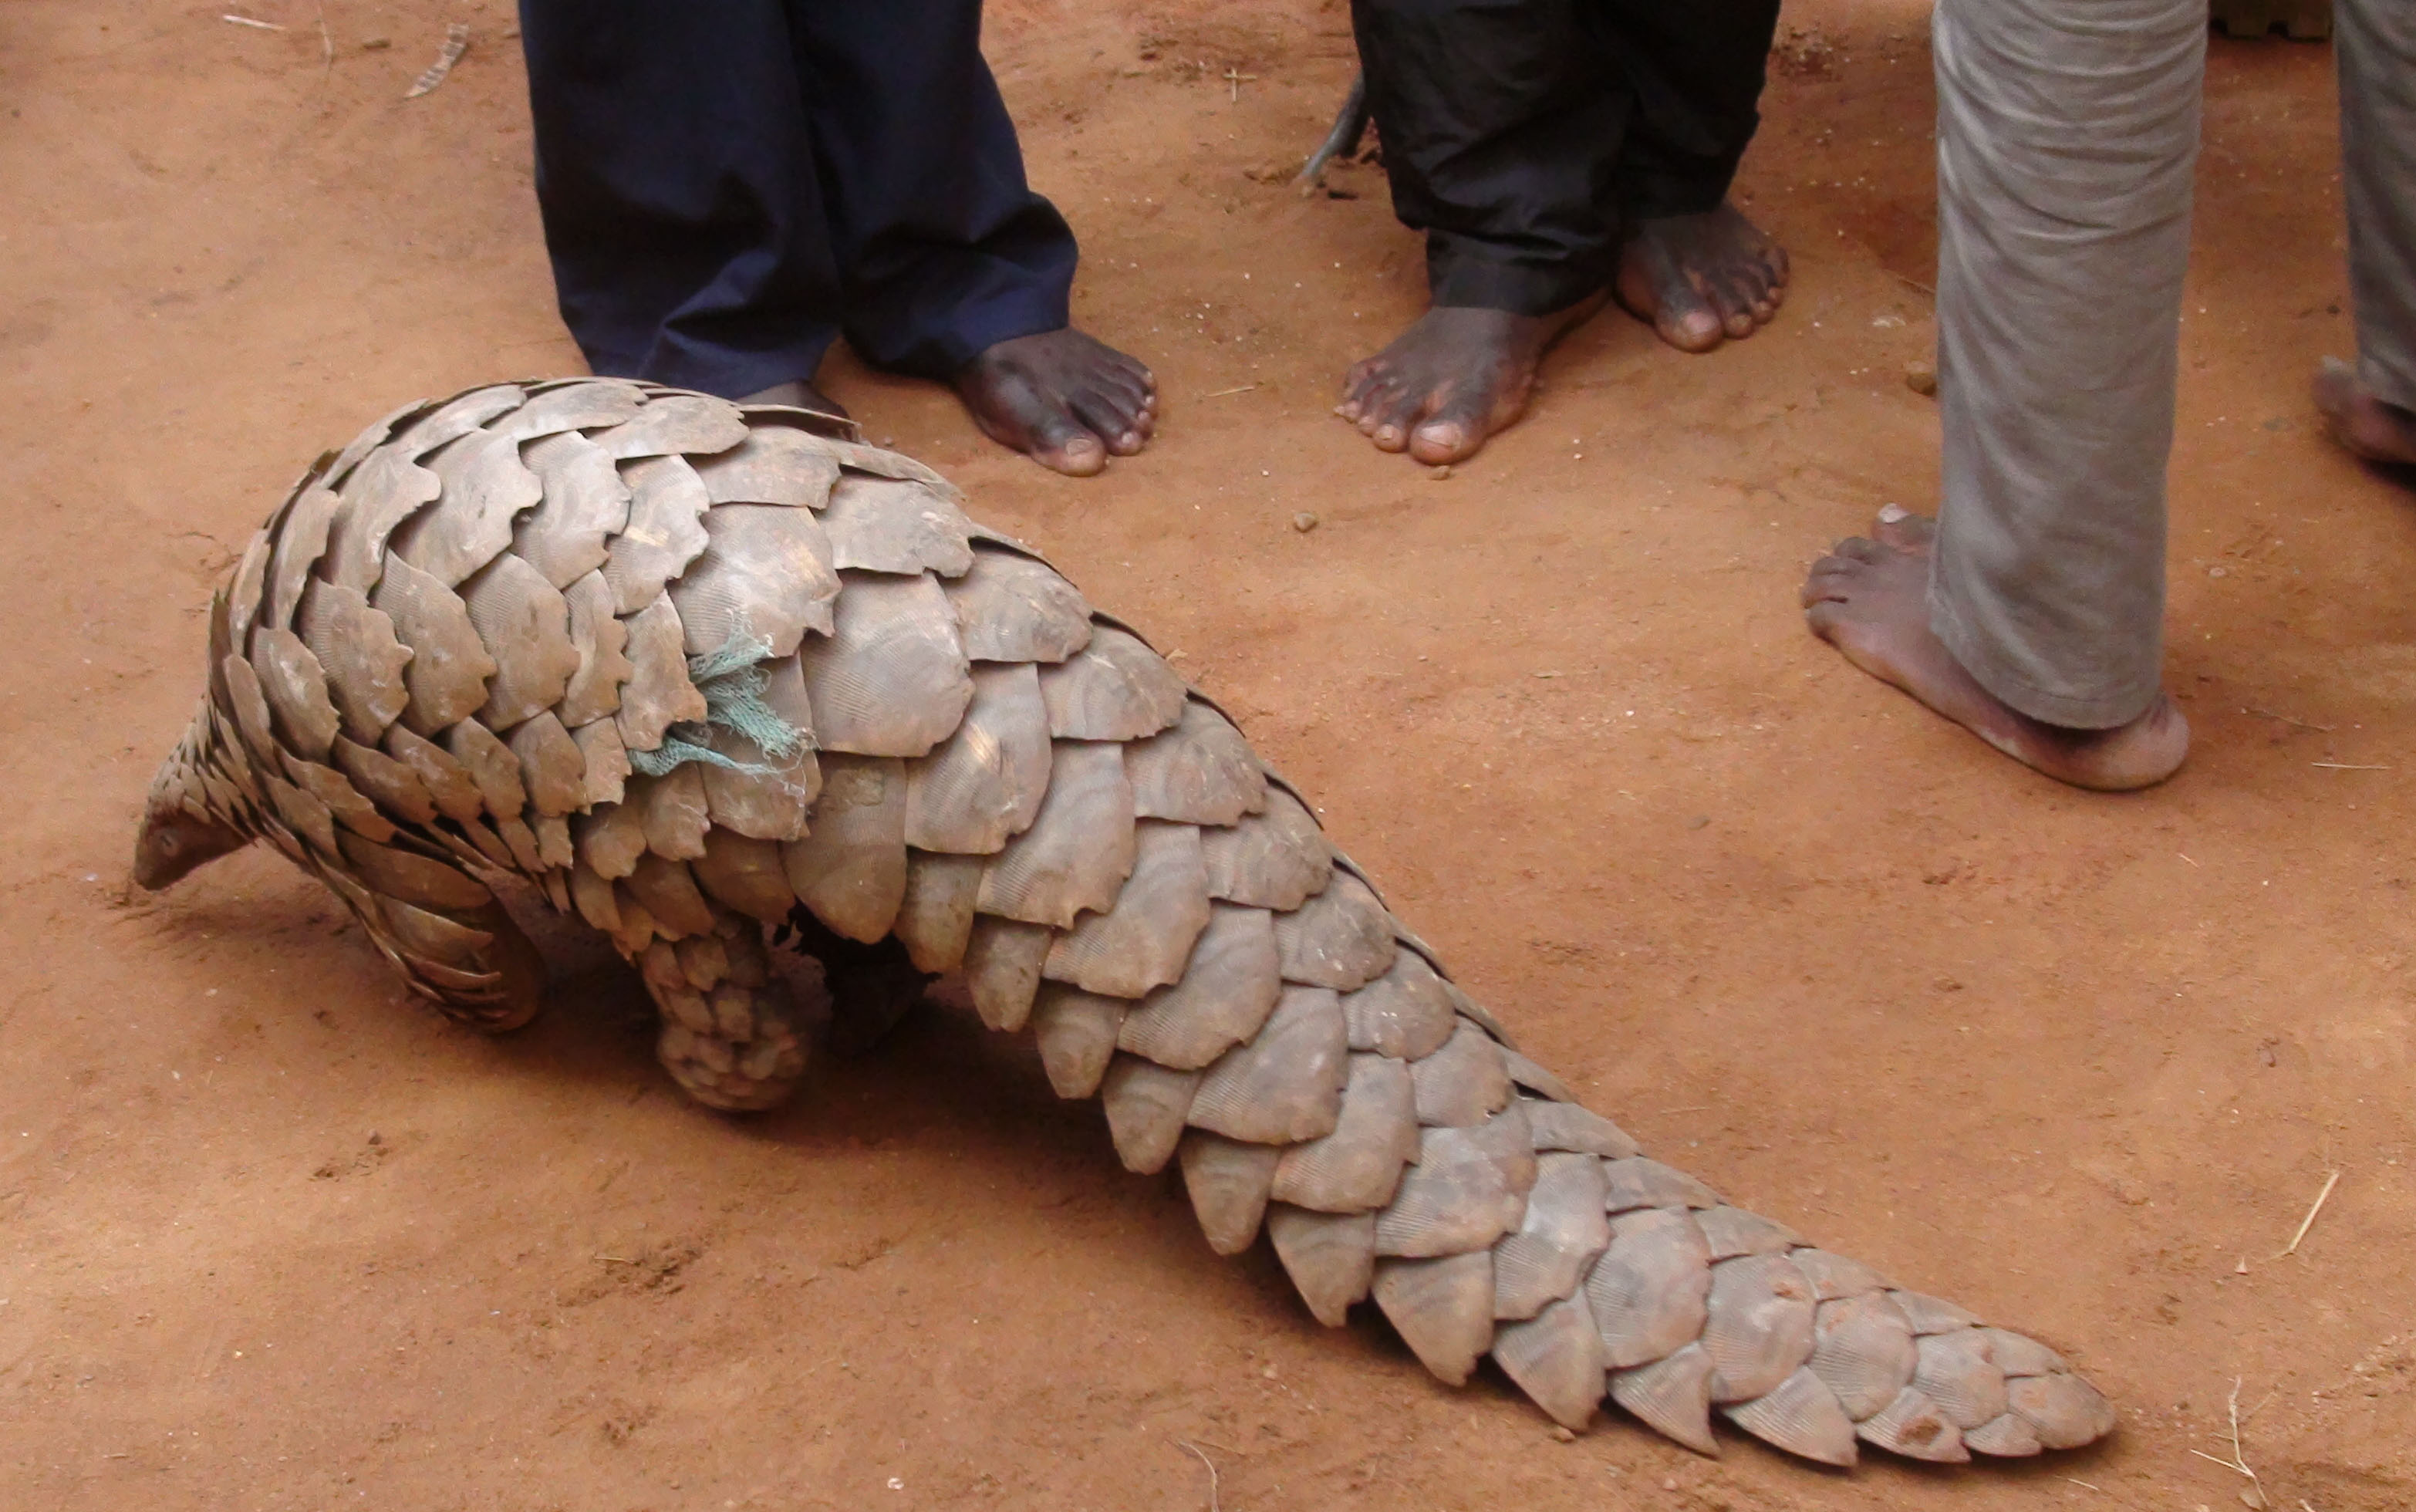 One of the Pangolins at Kitgum Central Police Station on Friday, April 14th, 2016.